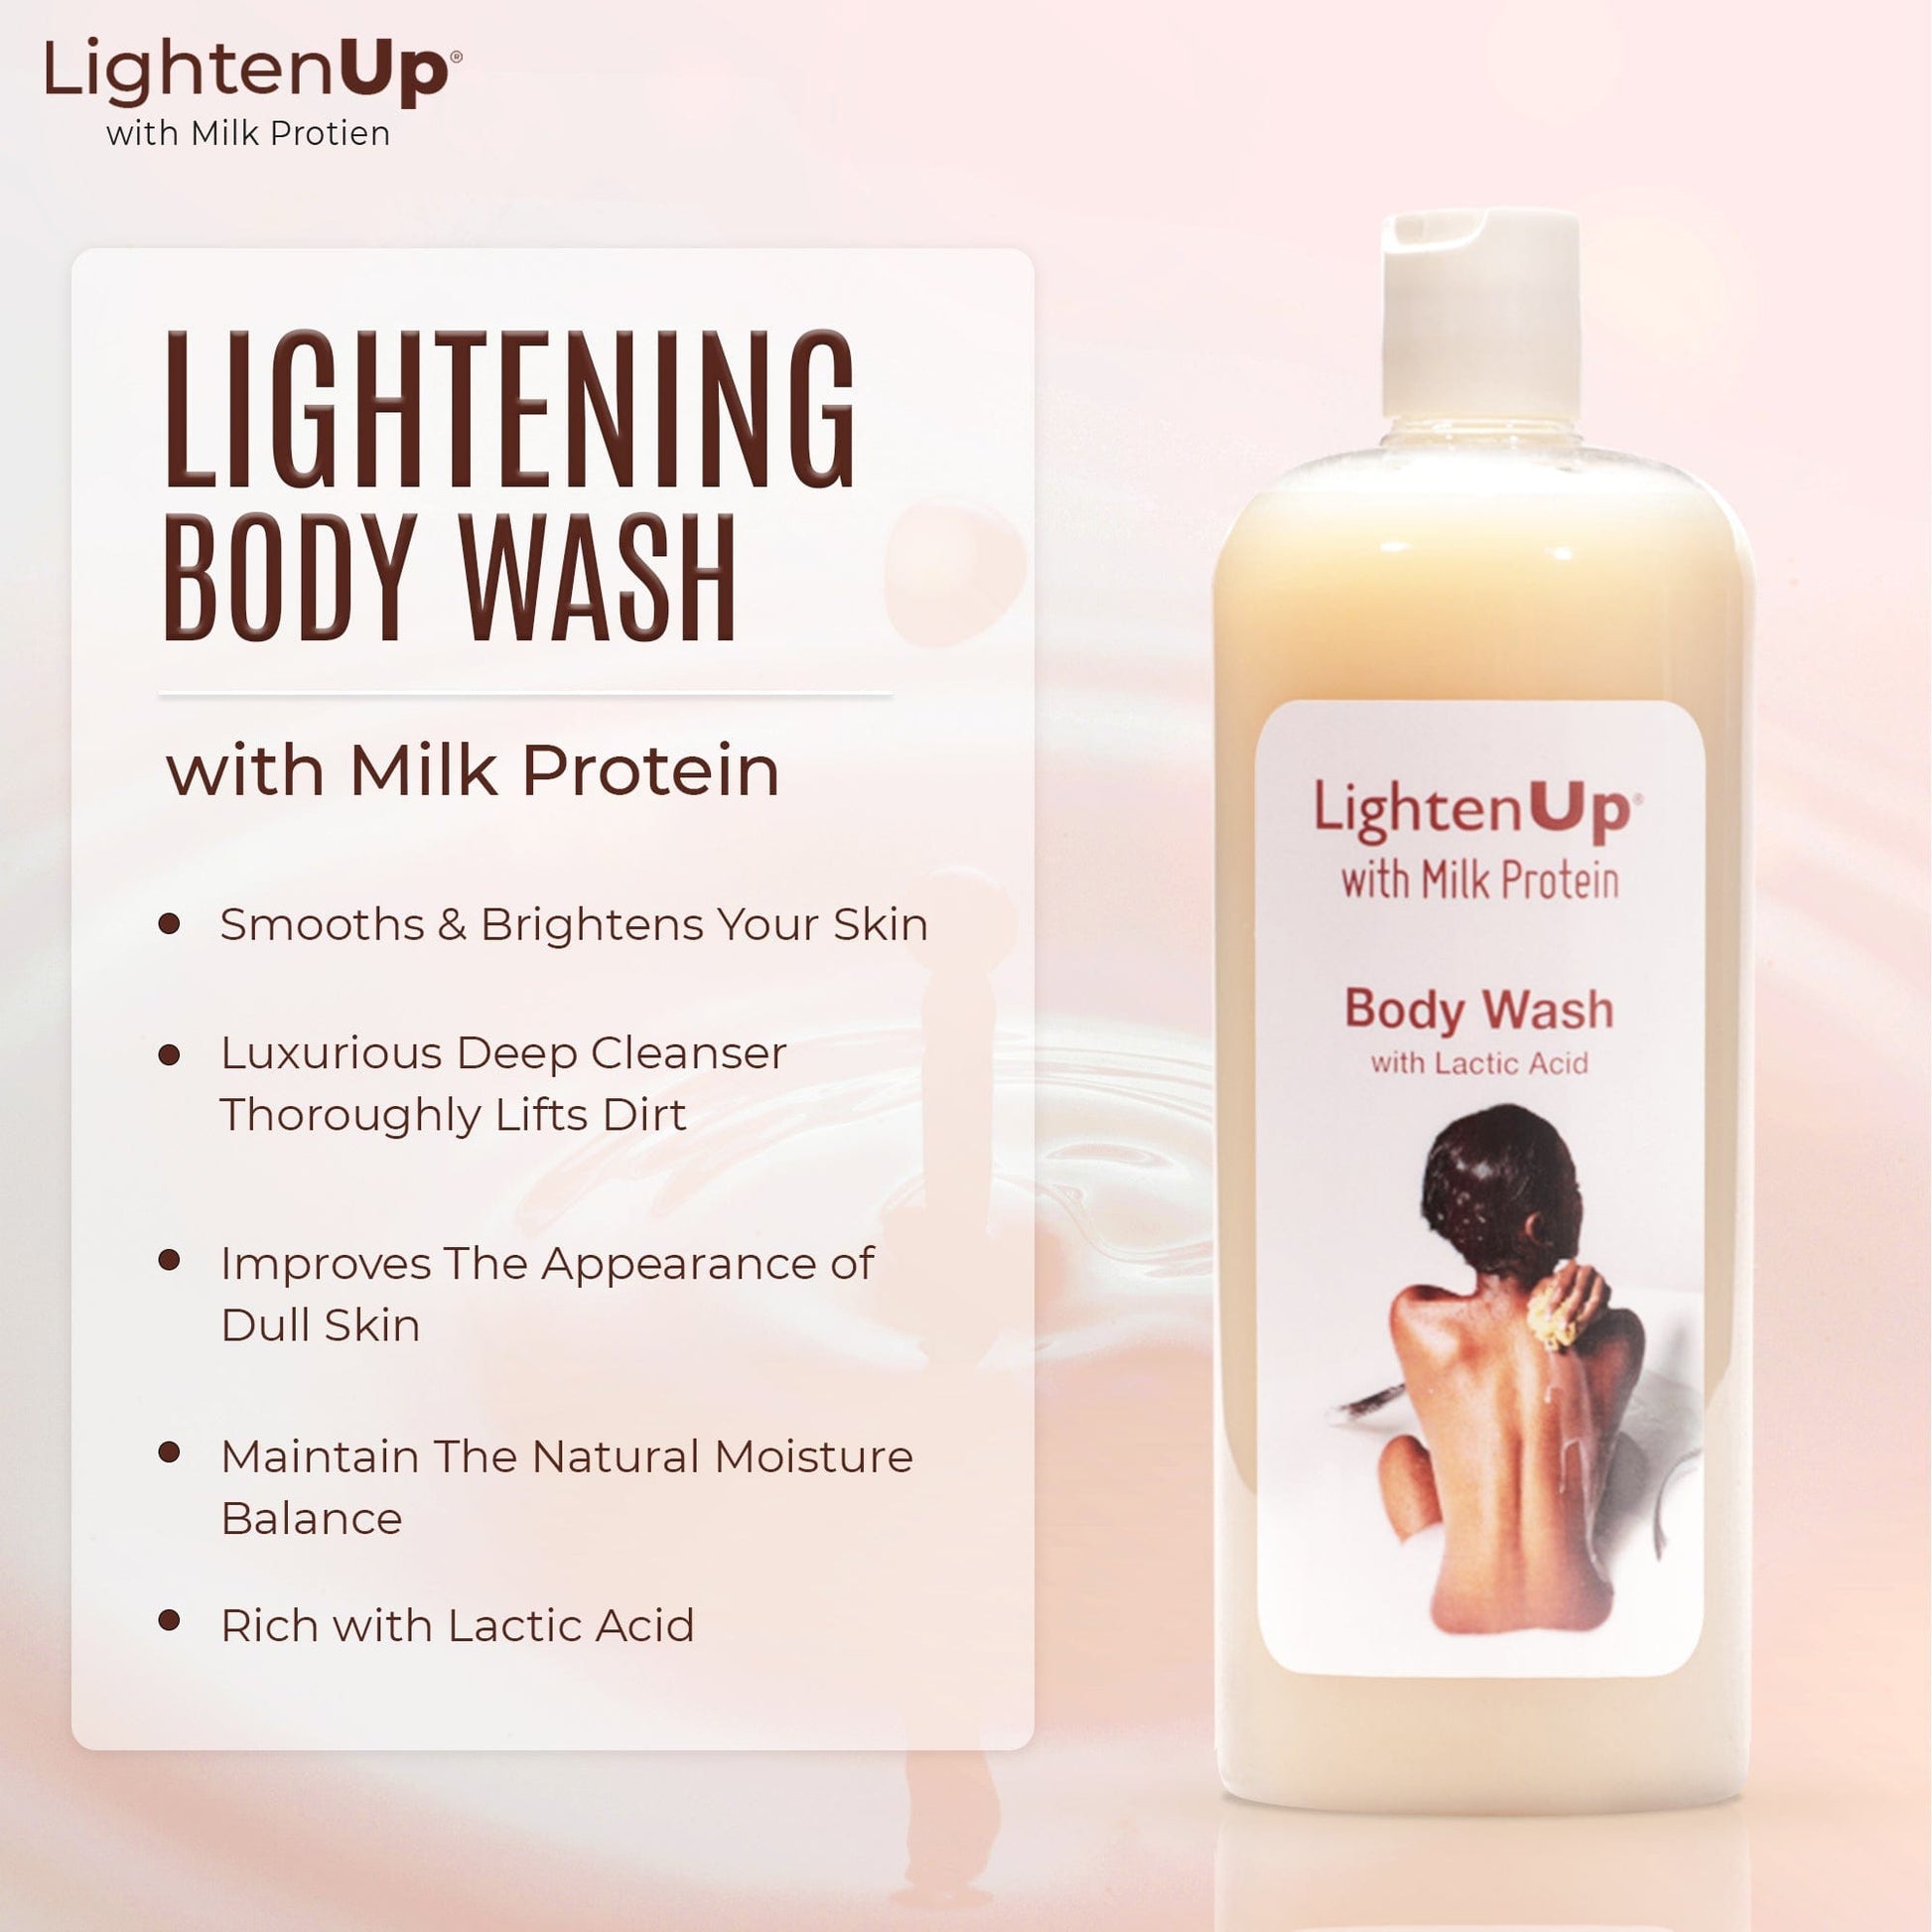 Omic Lightenup Lactic Acid Shea Butter Shower Gel - 1000ml Mitchell Brands - Mitchell Brands - Skin Lightening, Skin Brightening, Fade Dark Spots, Shea Butter, Hair Growth Products